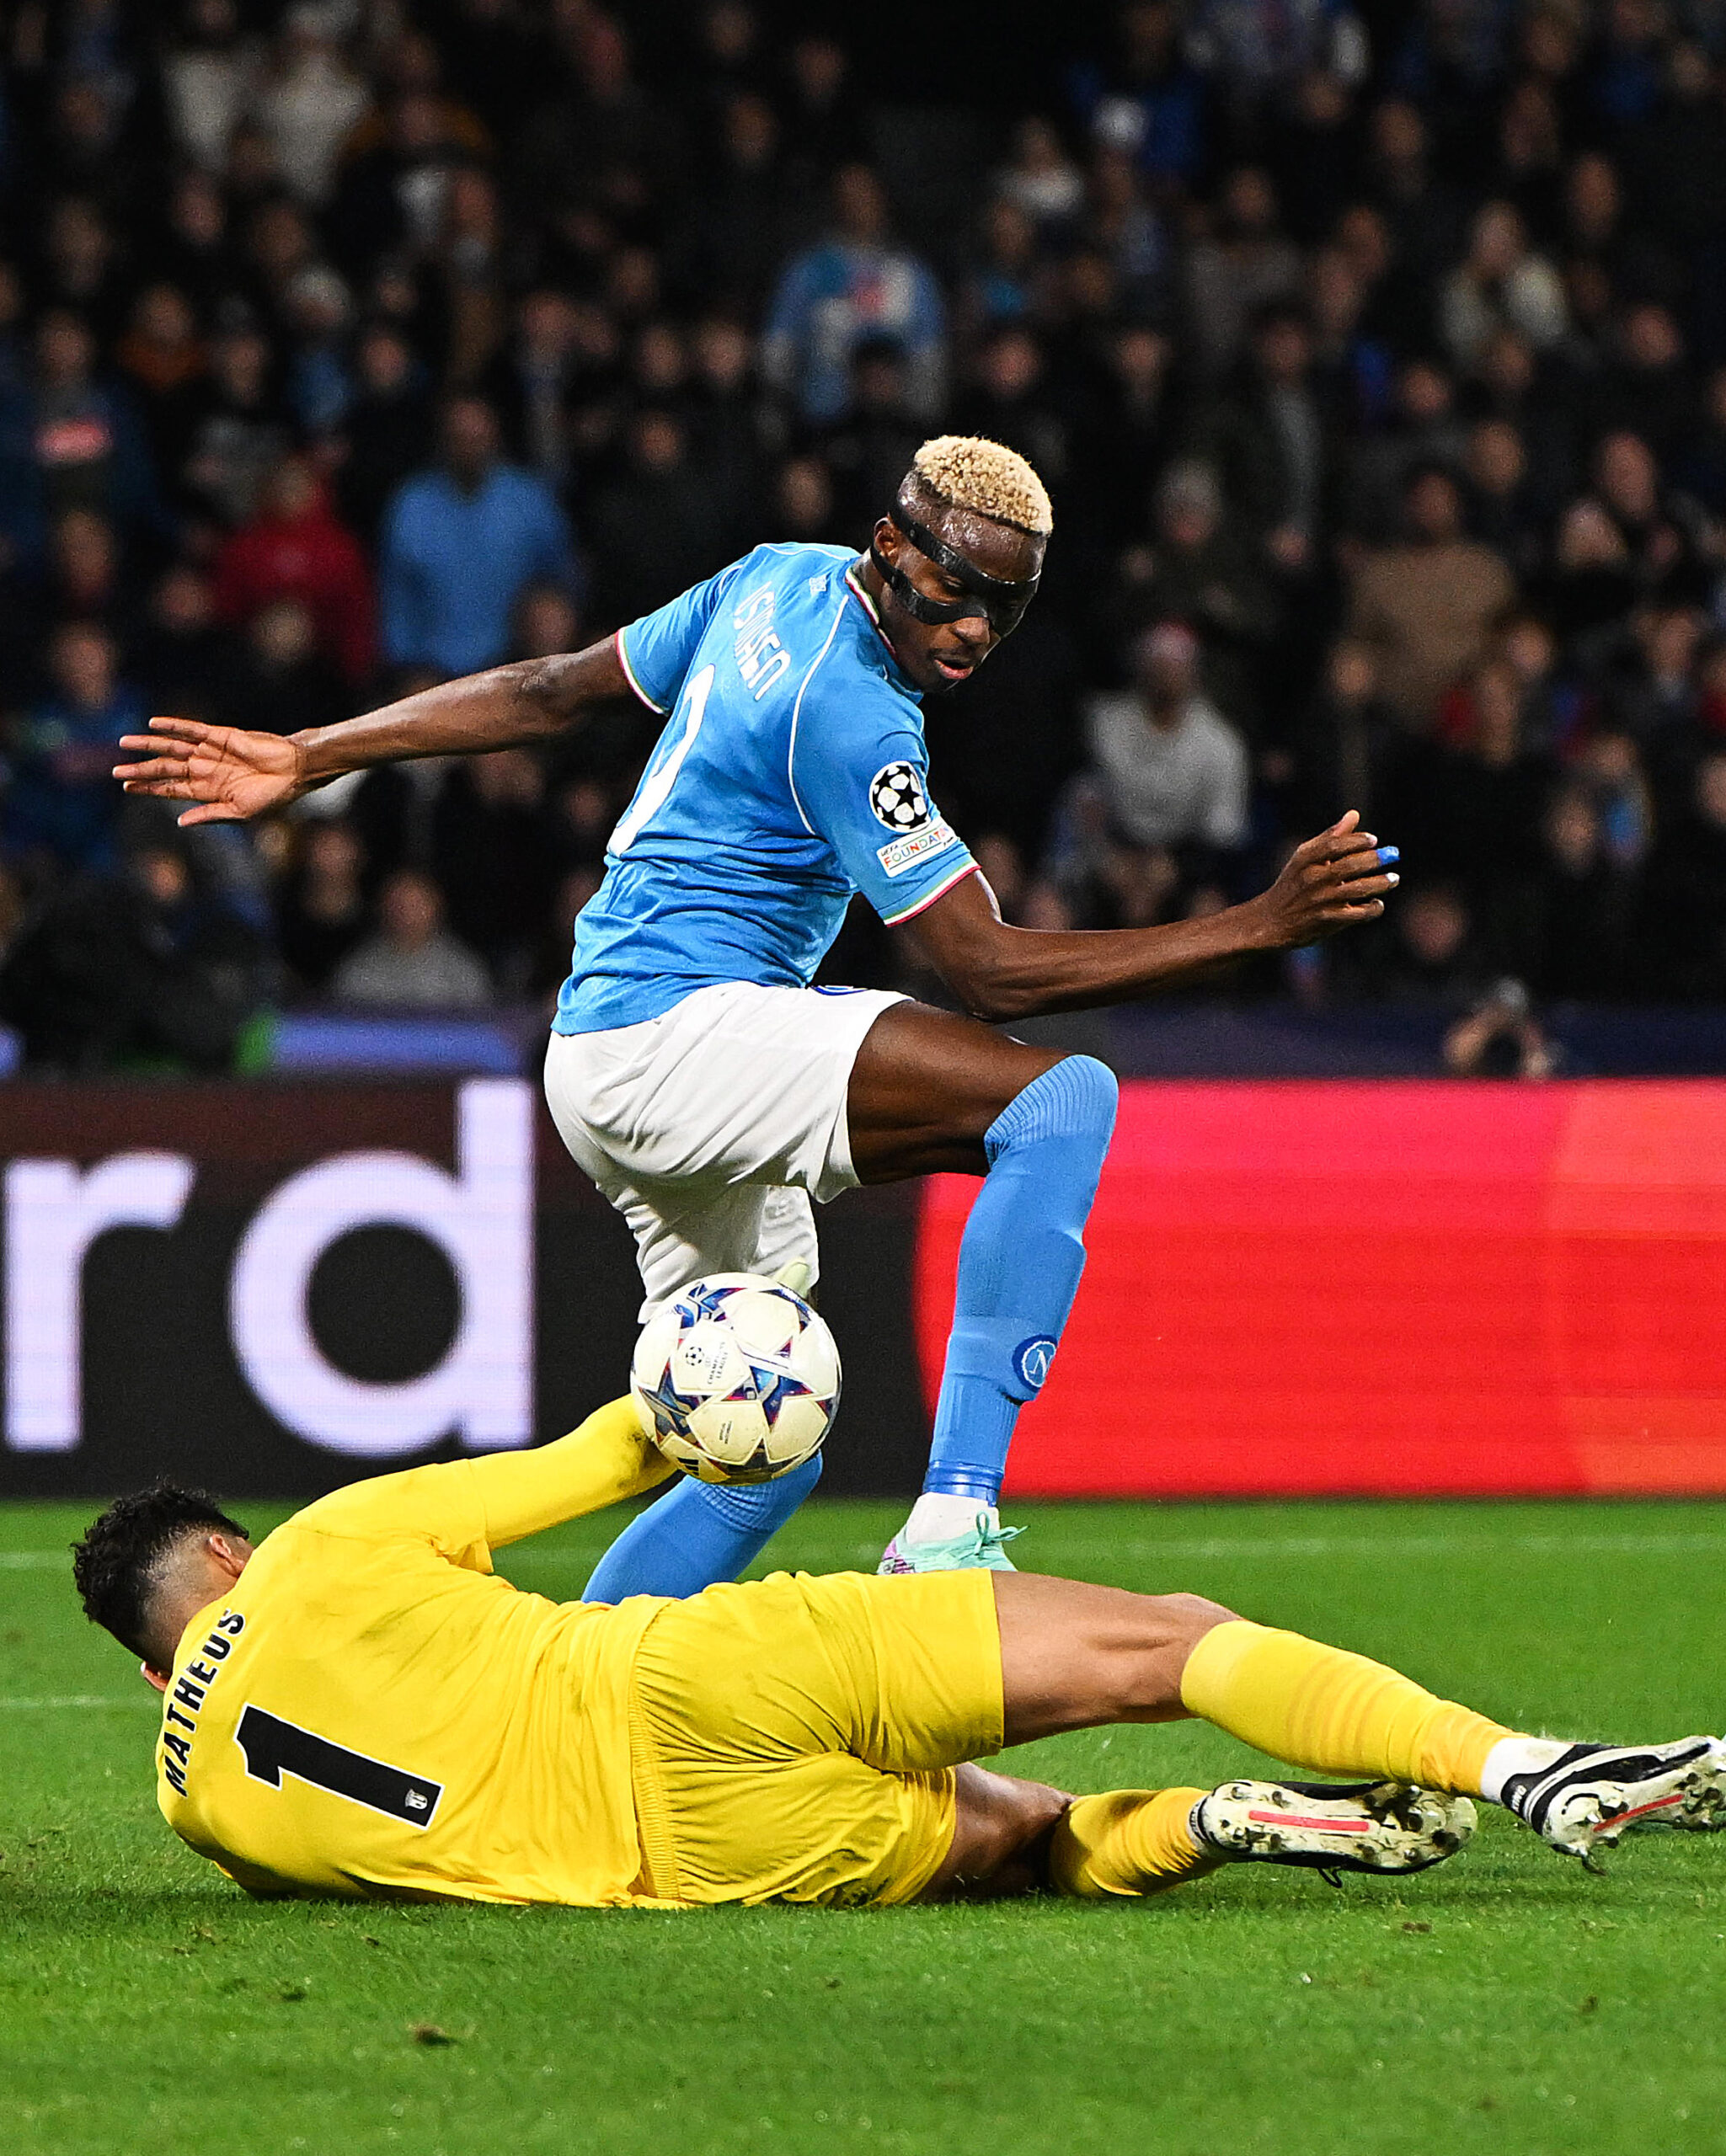 UCL: Osimhen scores as Napoli win to progress to R16